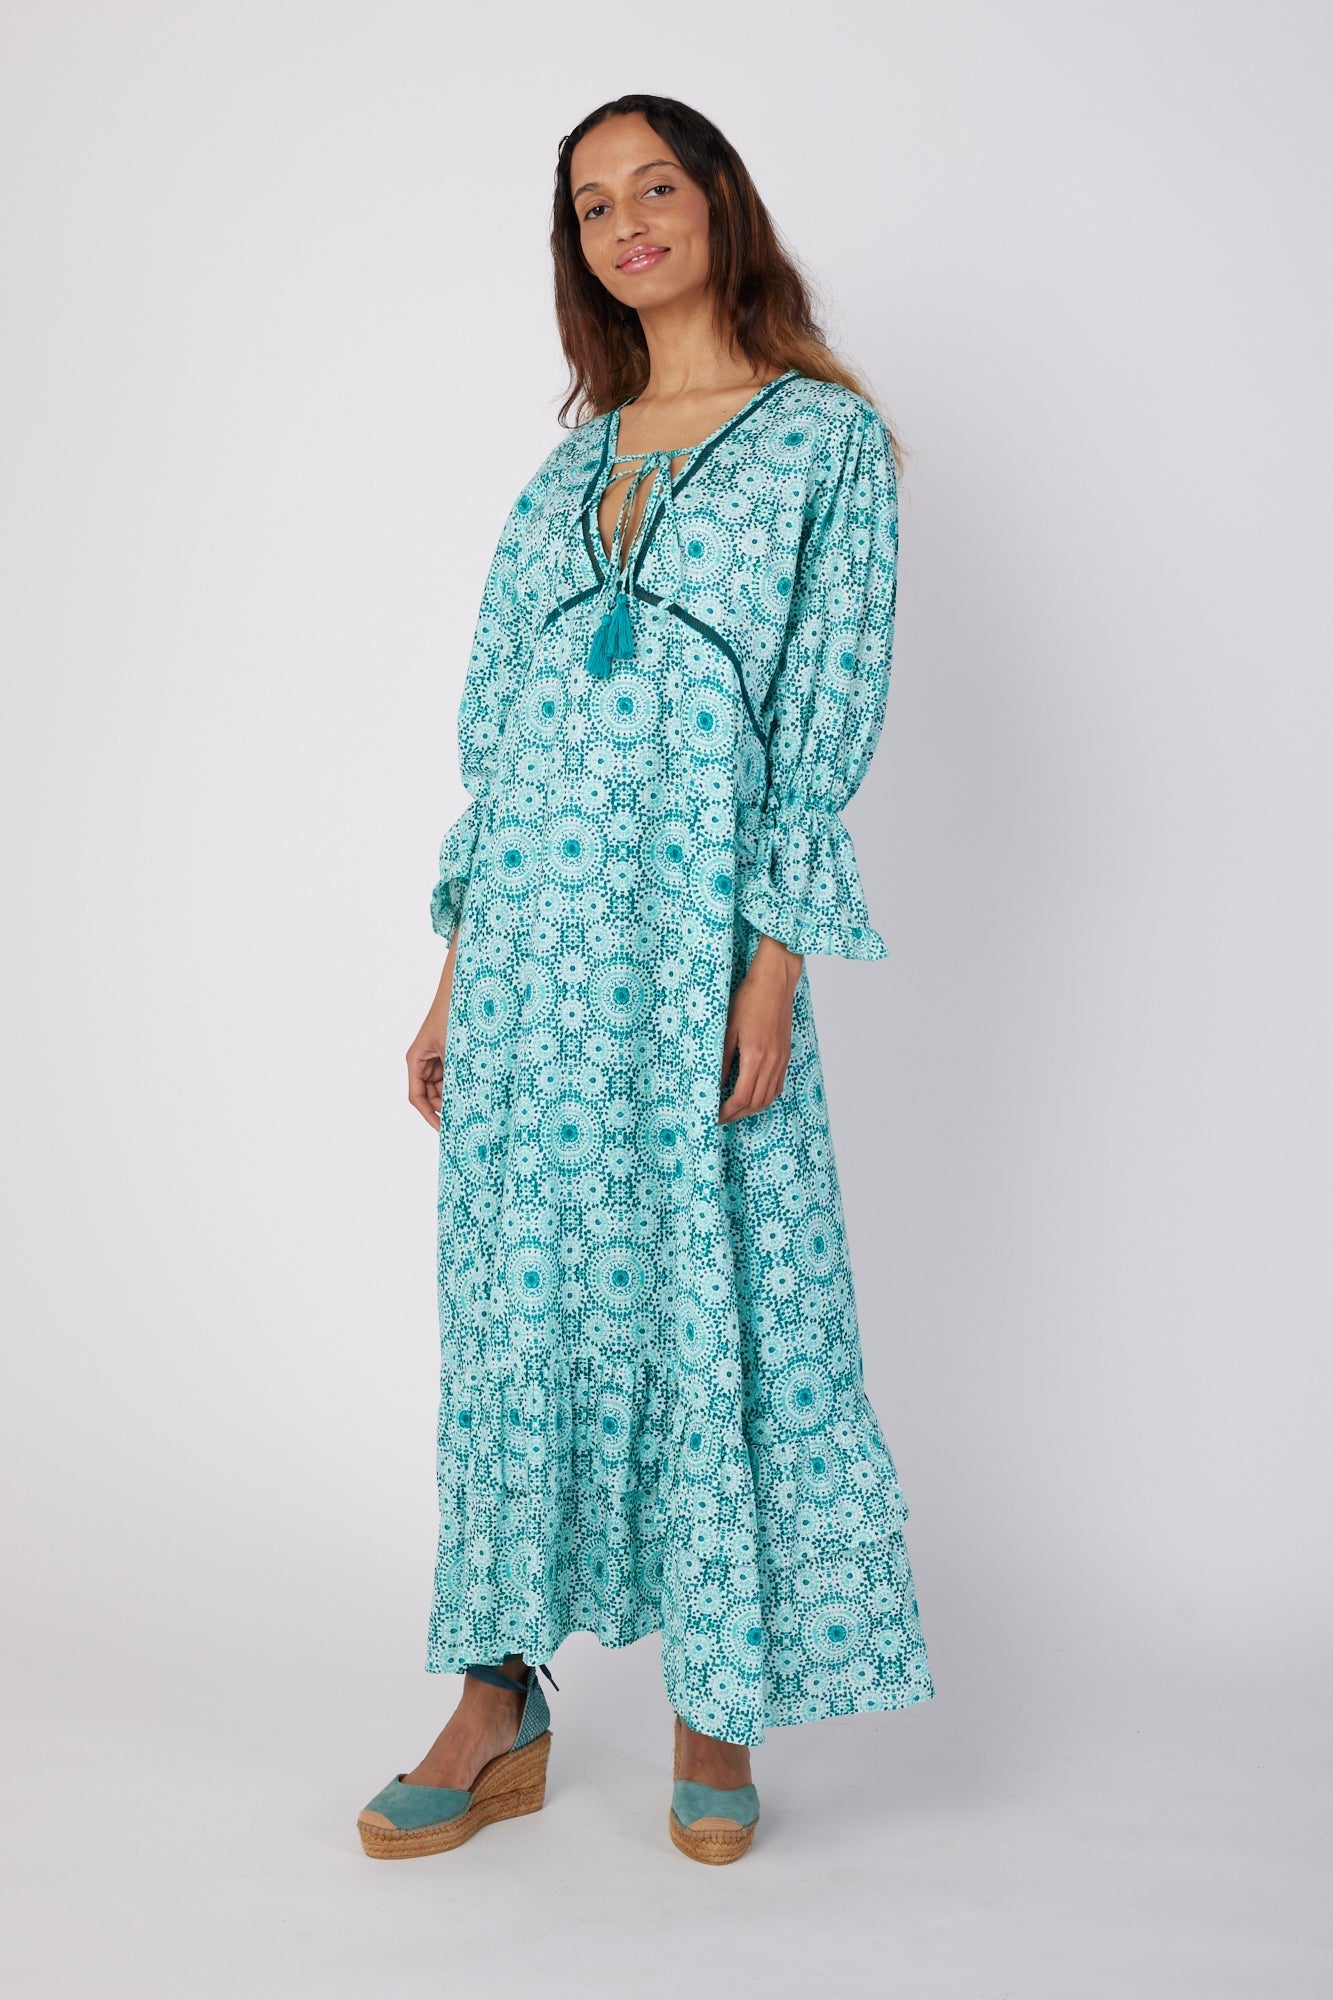 ModaPosa Brigida Ruffle Sleeve Swiss Dot V-Neck Maxi Dress in Moroccan Tile . Discover women's resort dresses and lifestyle clothing inspired by the Mediterranean. Free worldwide shipping available!